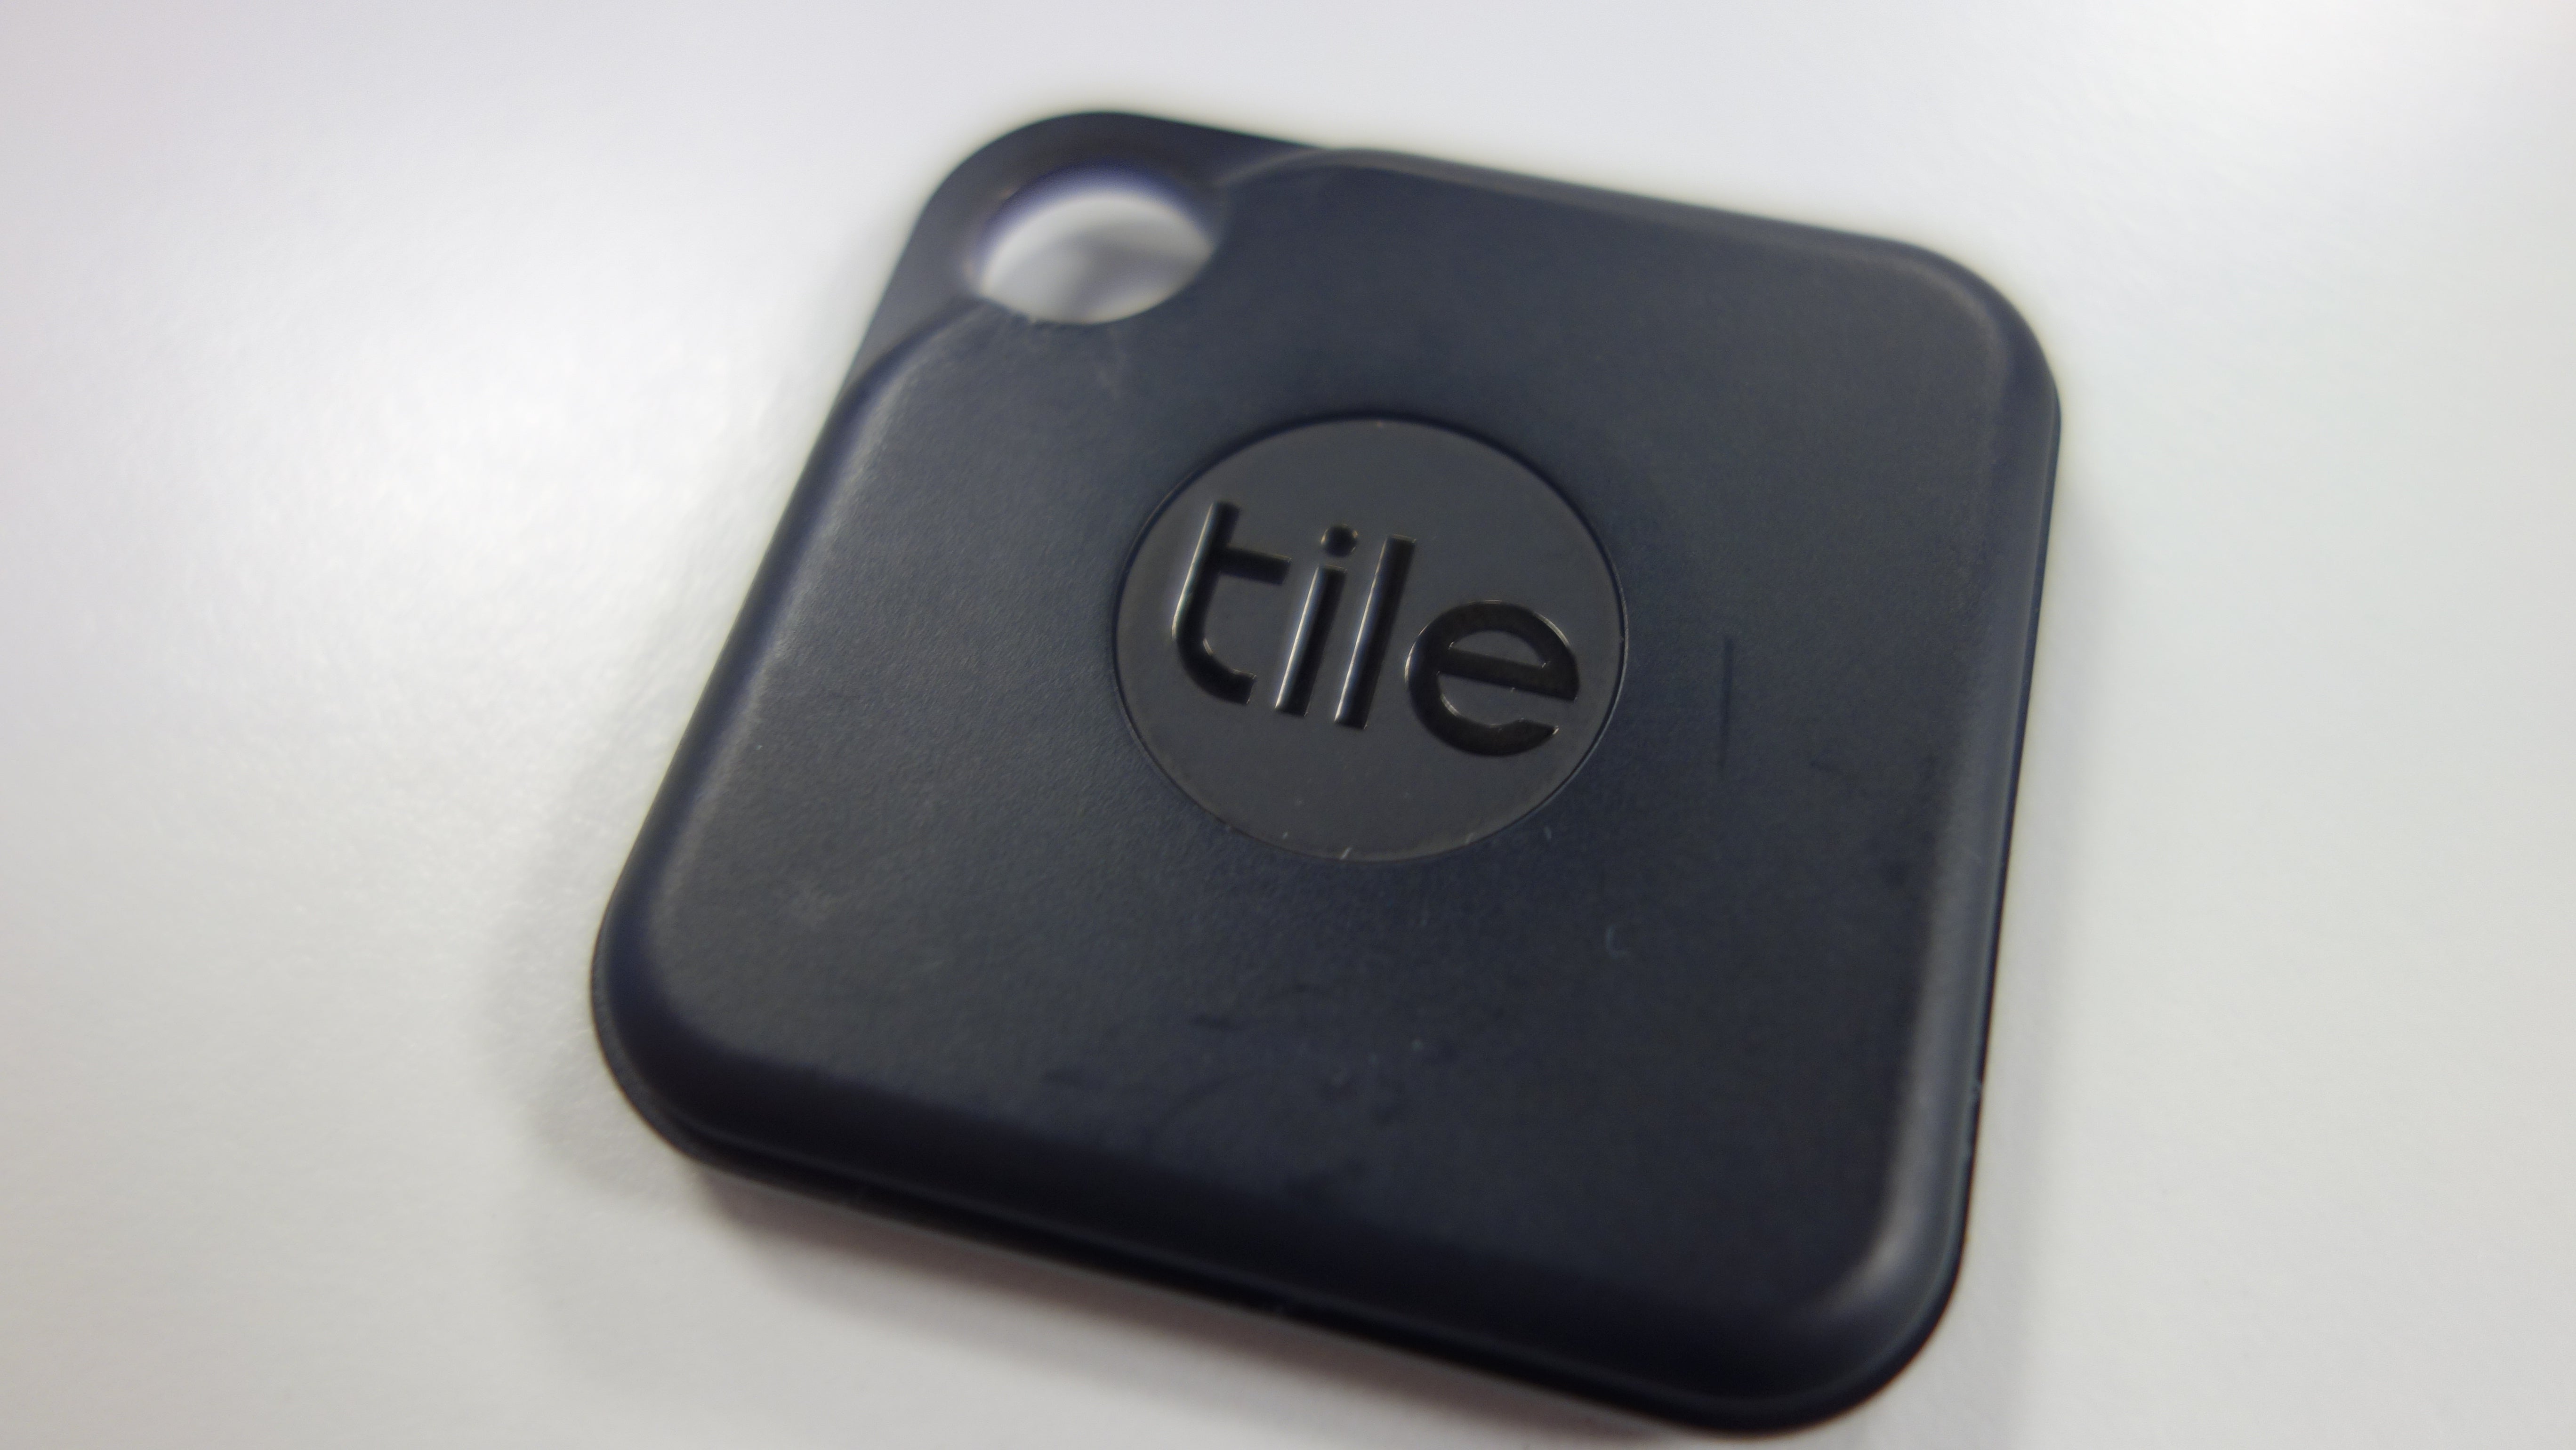 Tile Pro Review Trusted Reviews, The Tile Review